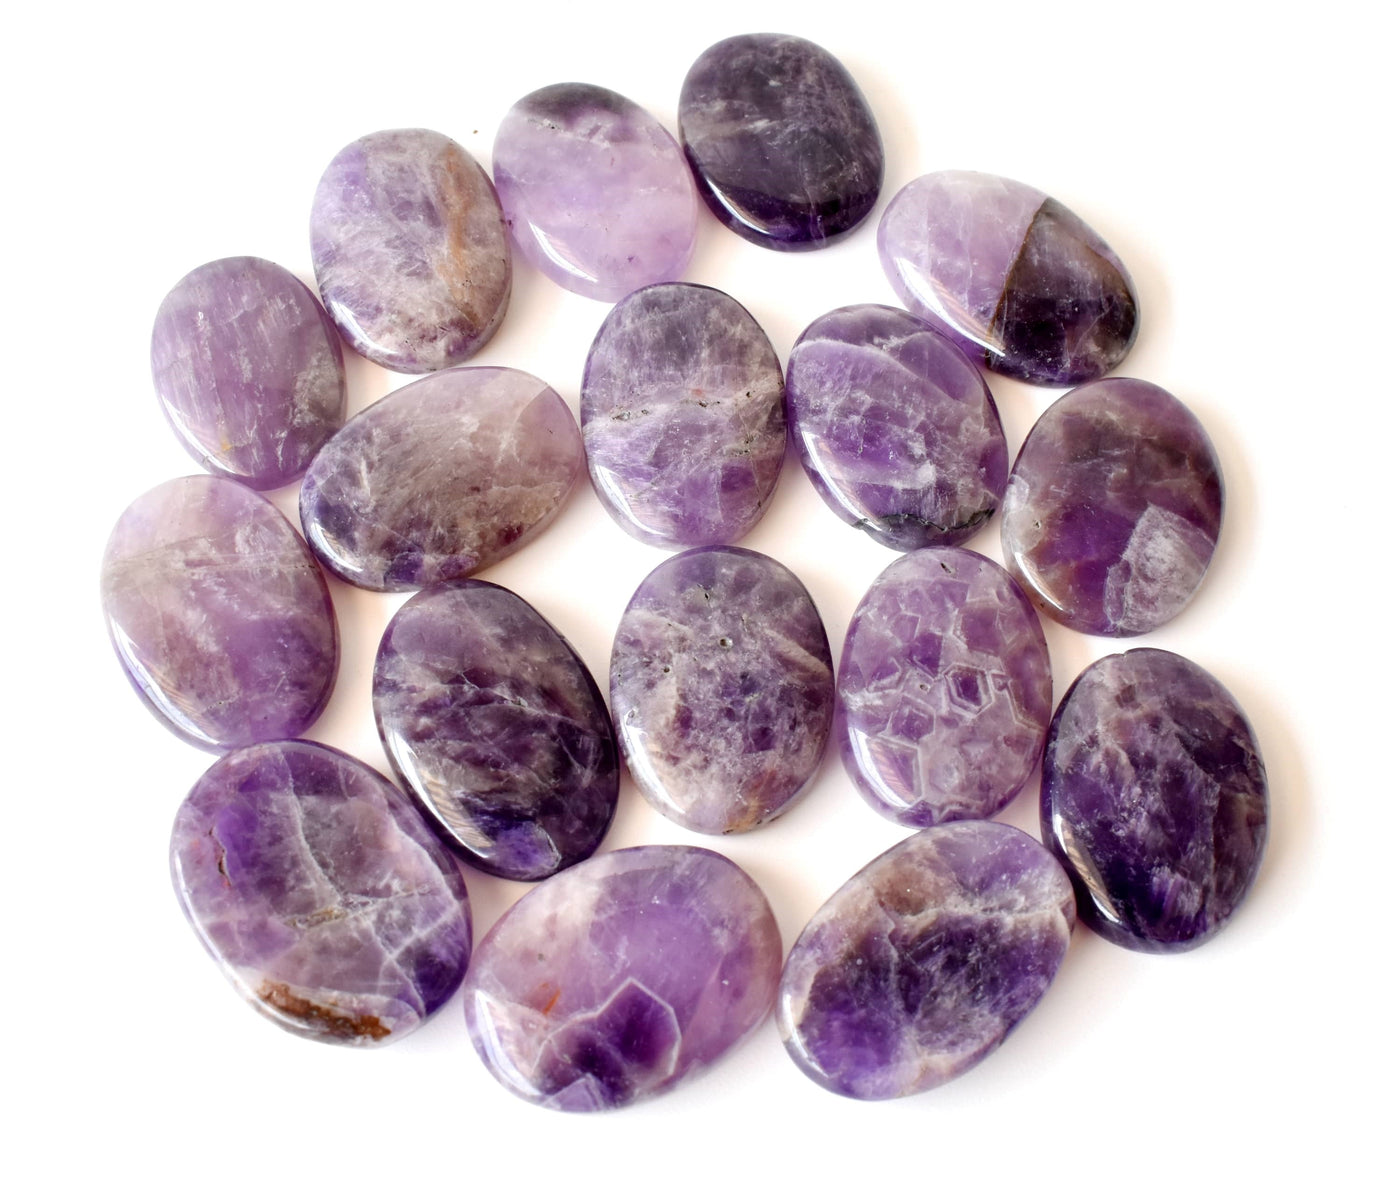 Amethyst Pocket Stones (Spiritual Awareness and Intuition)